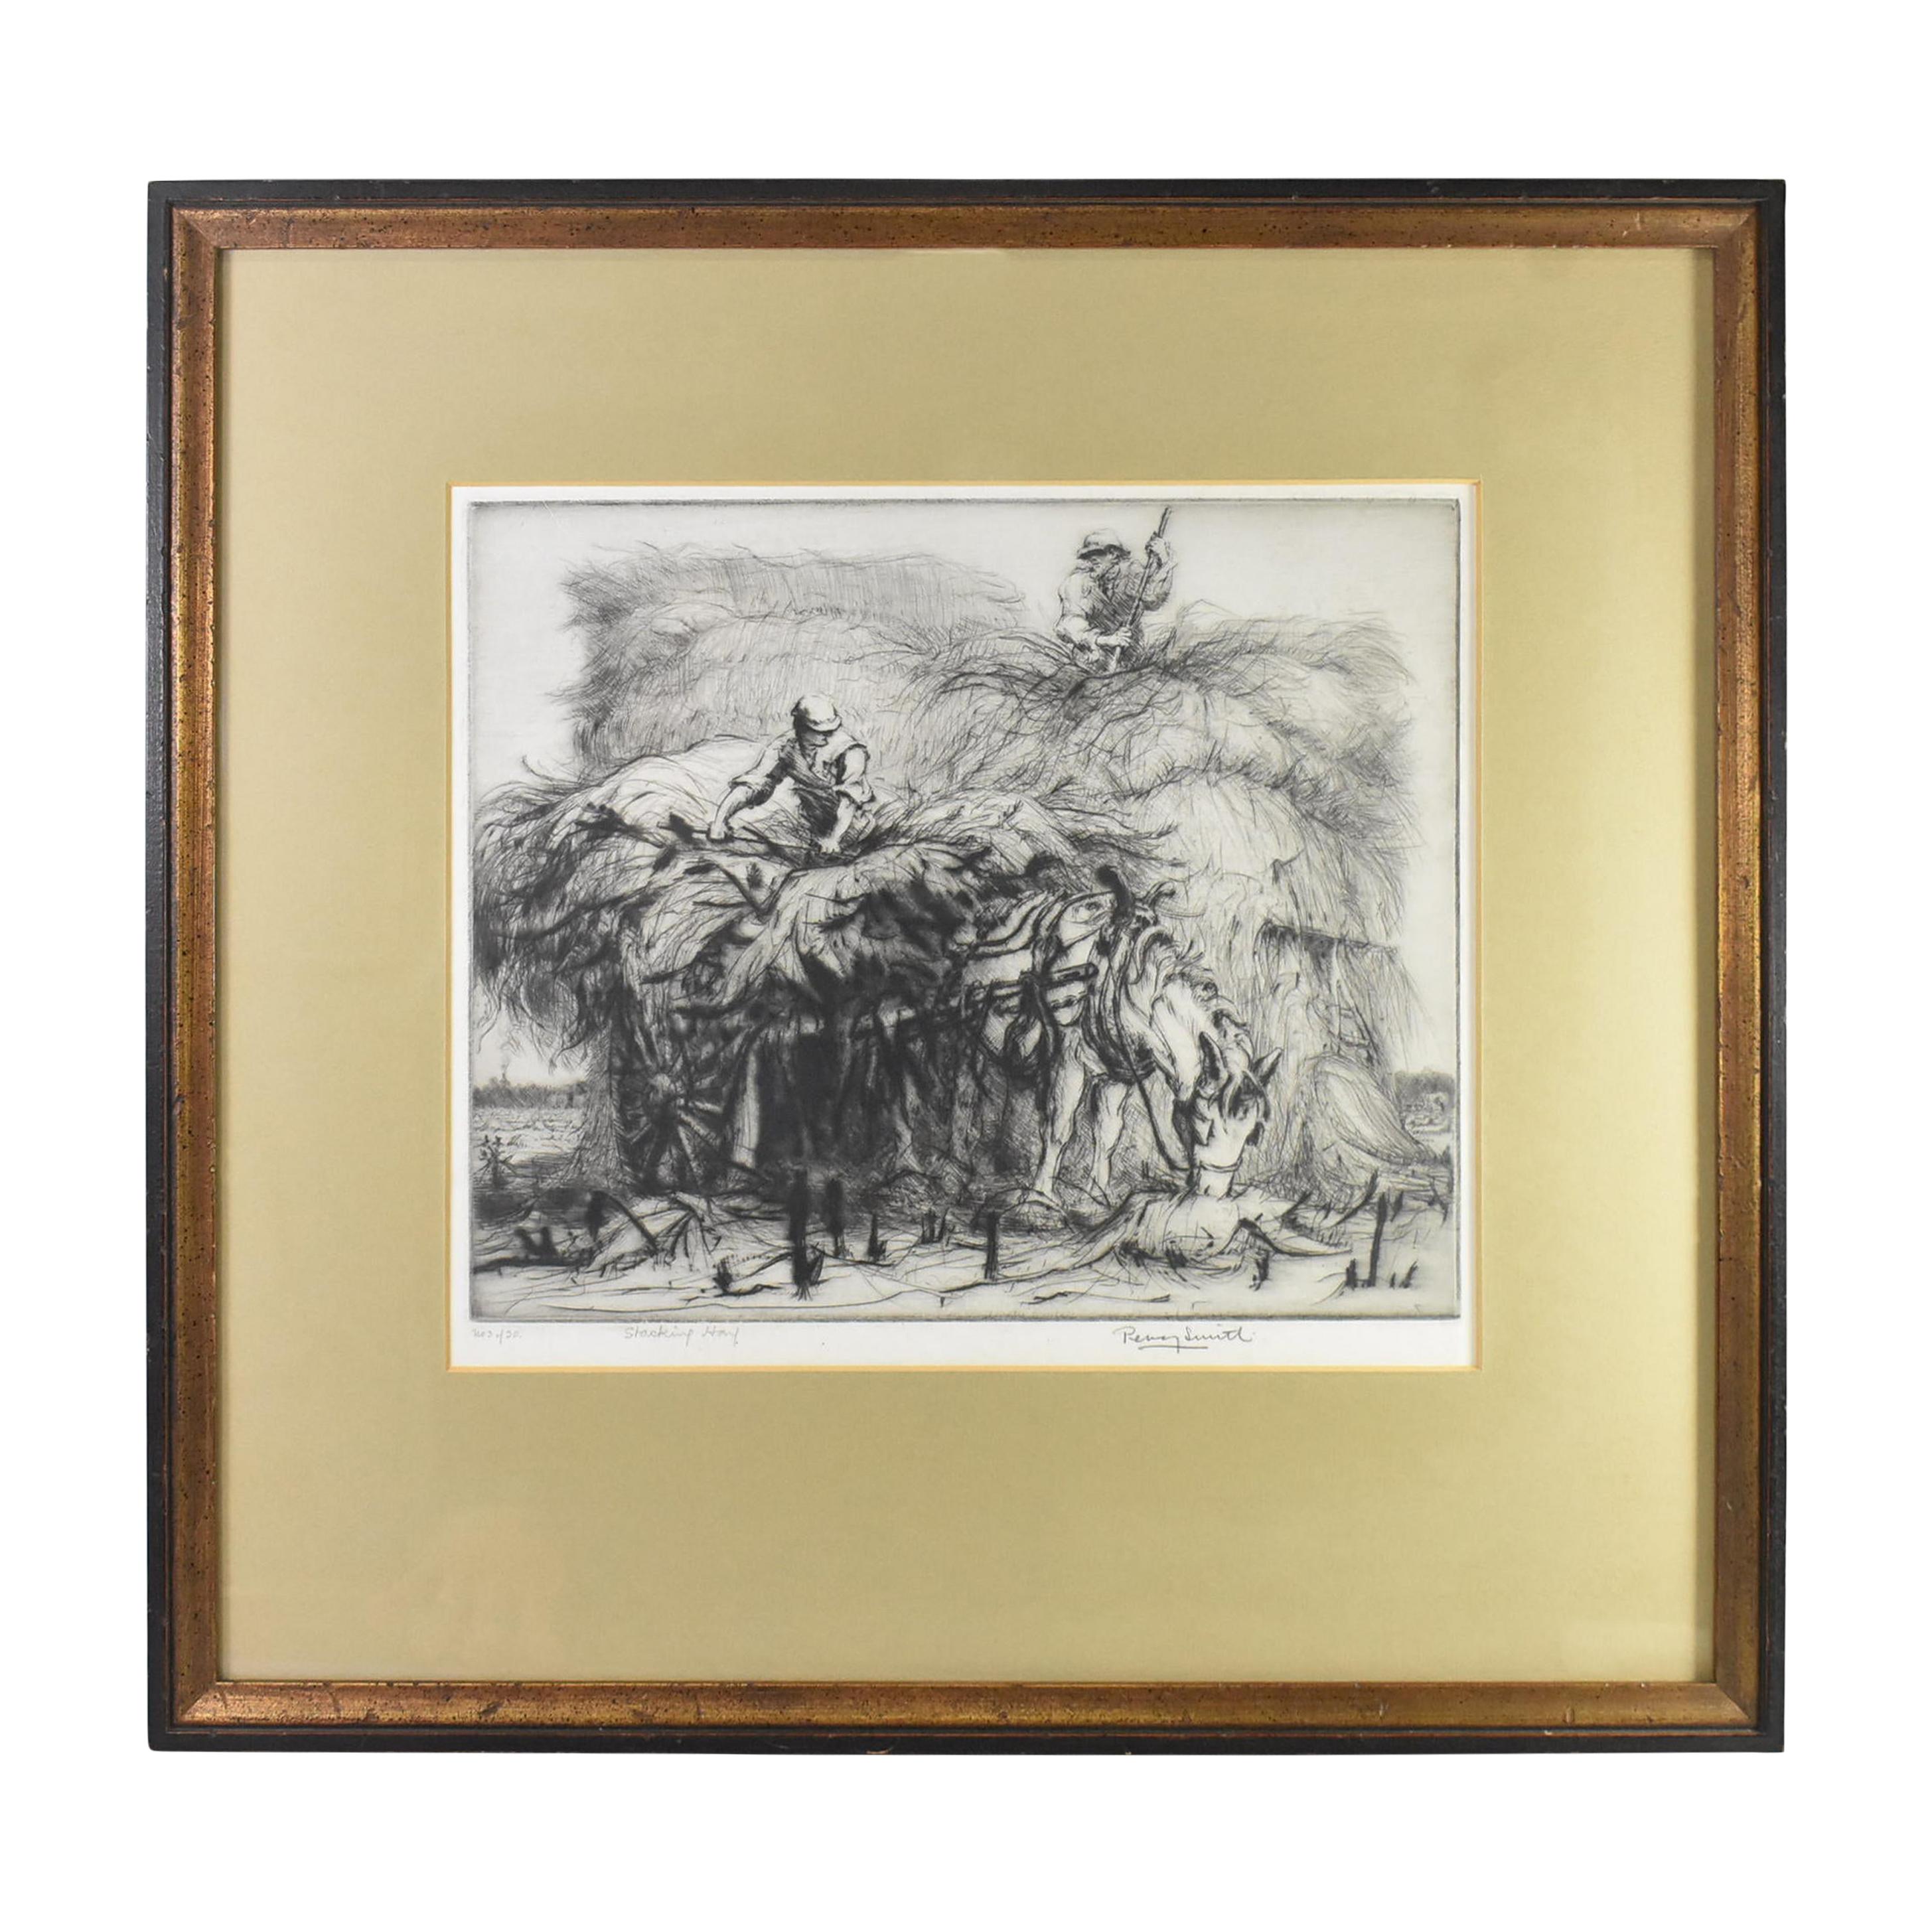 Percy John Delf Smith Engraving / Etching "Stacking Hay" 3/30